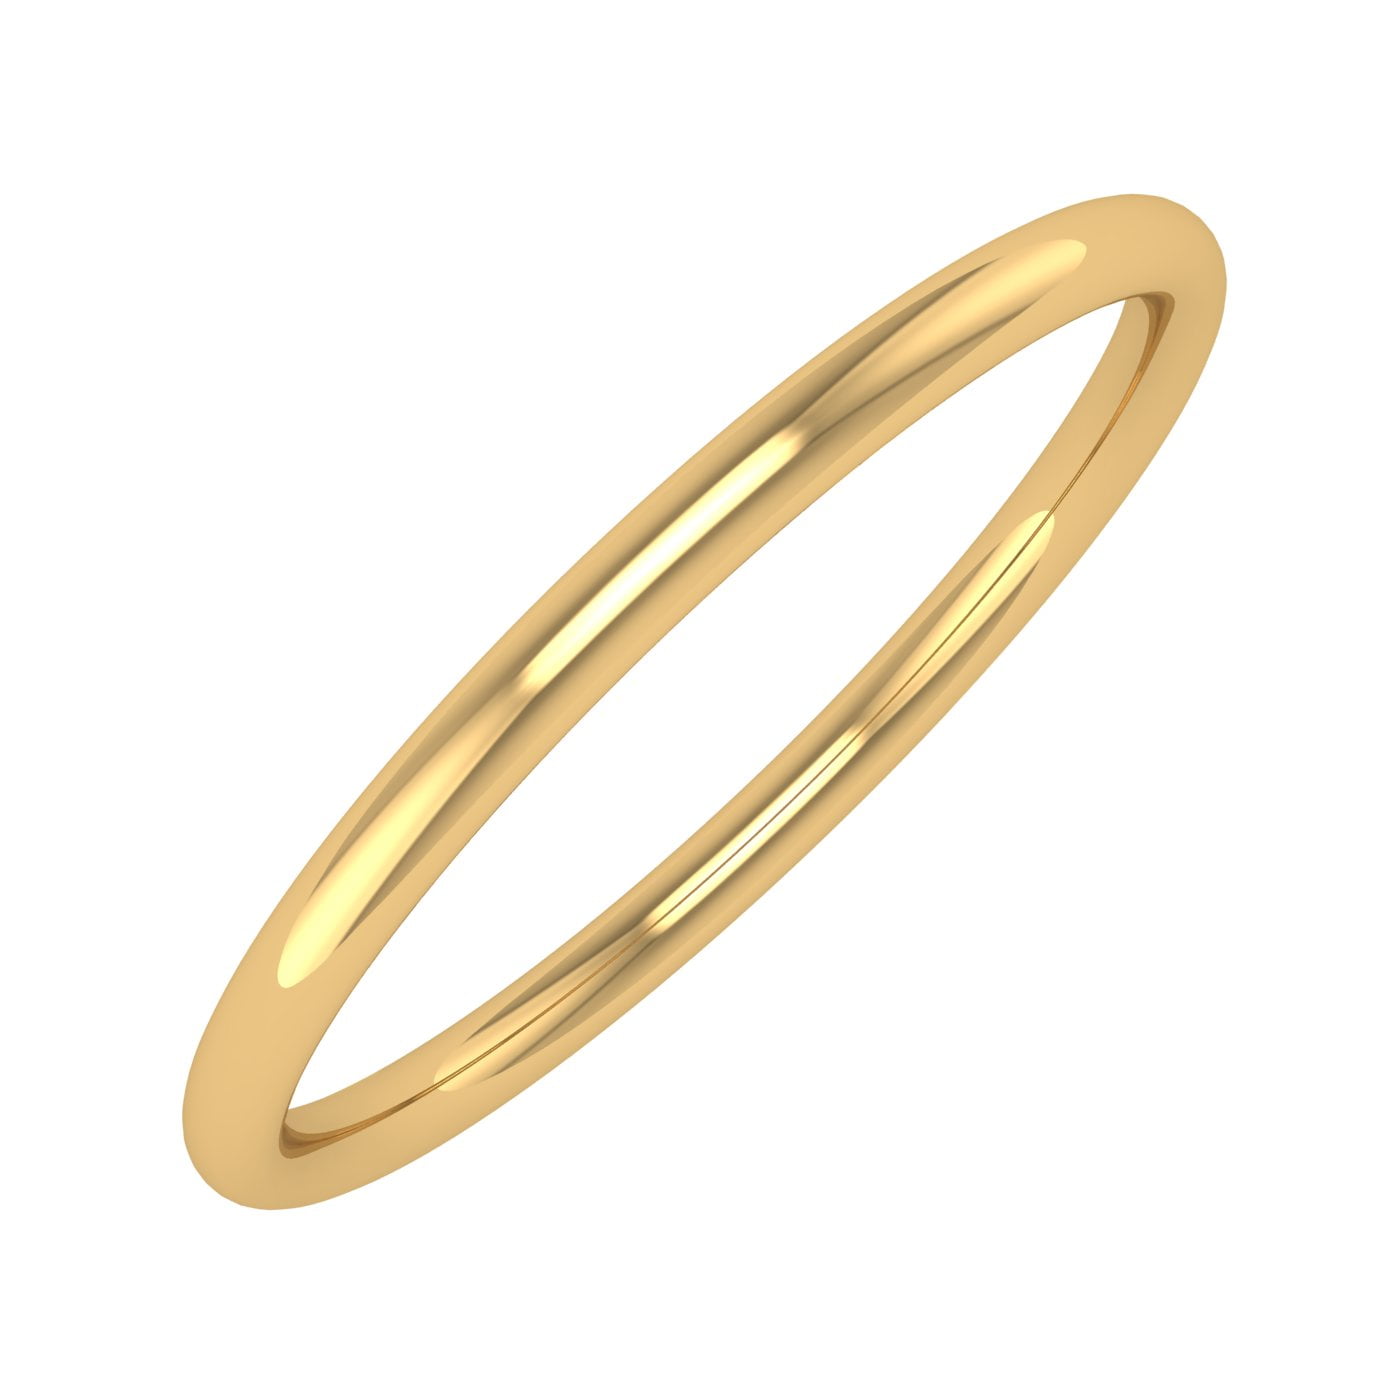 Buy Light Weight Impon Gold Rings Without Stones for Ladies